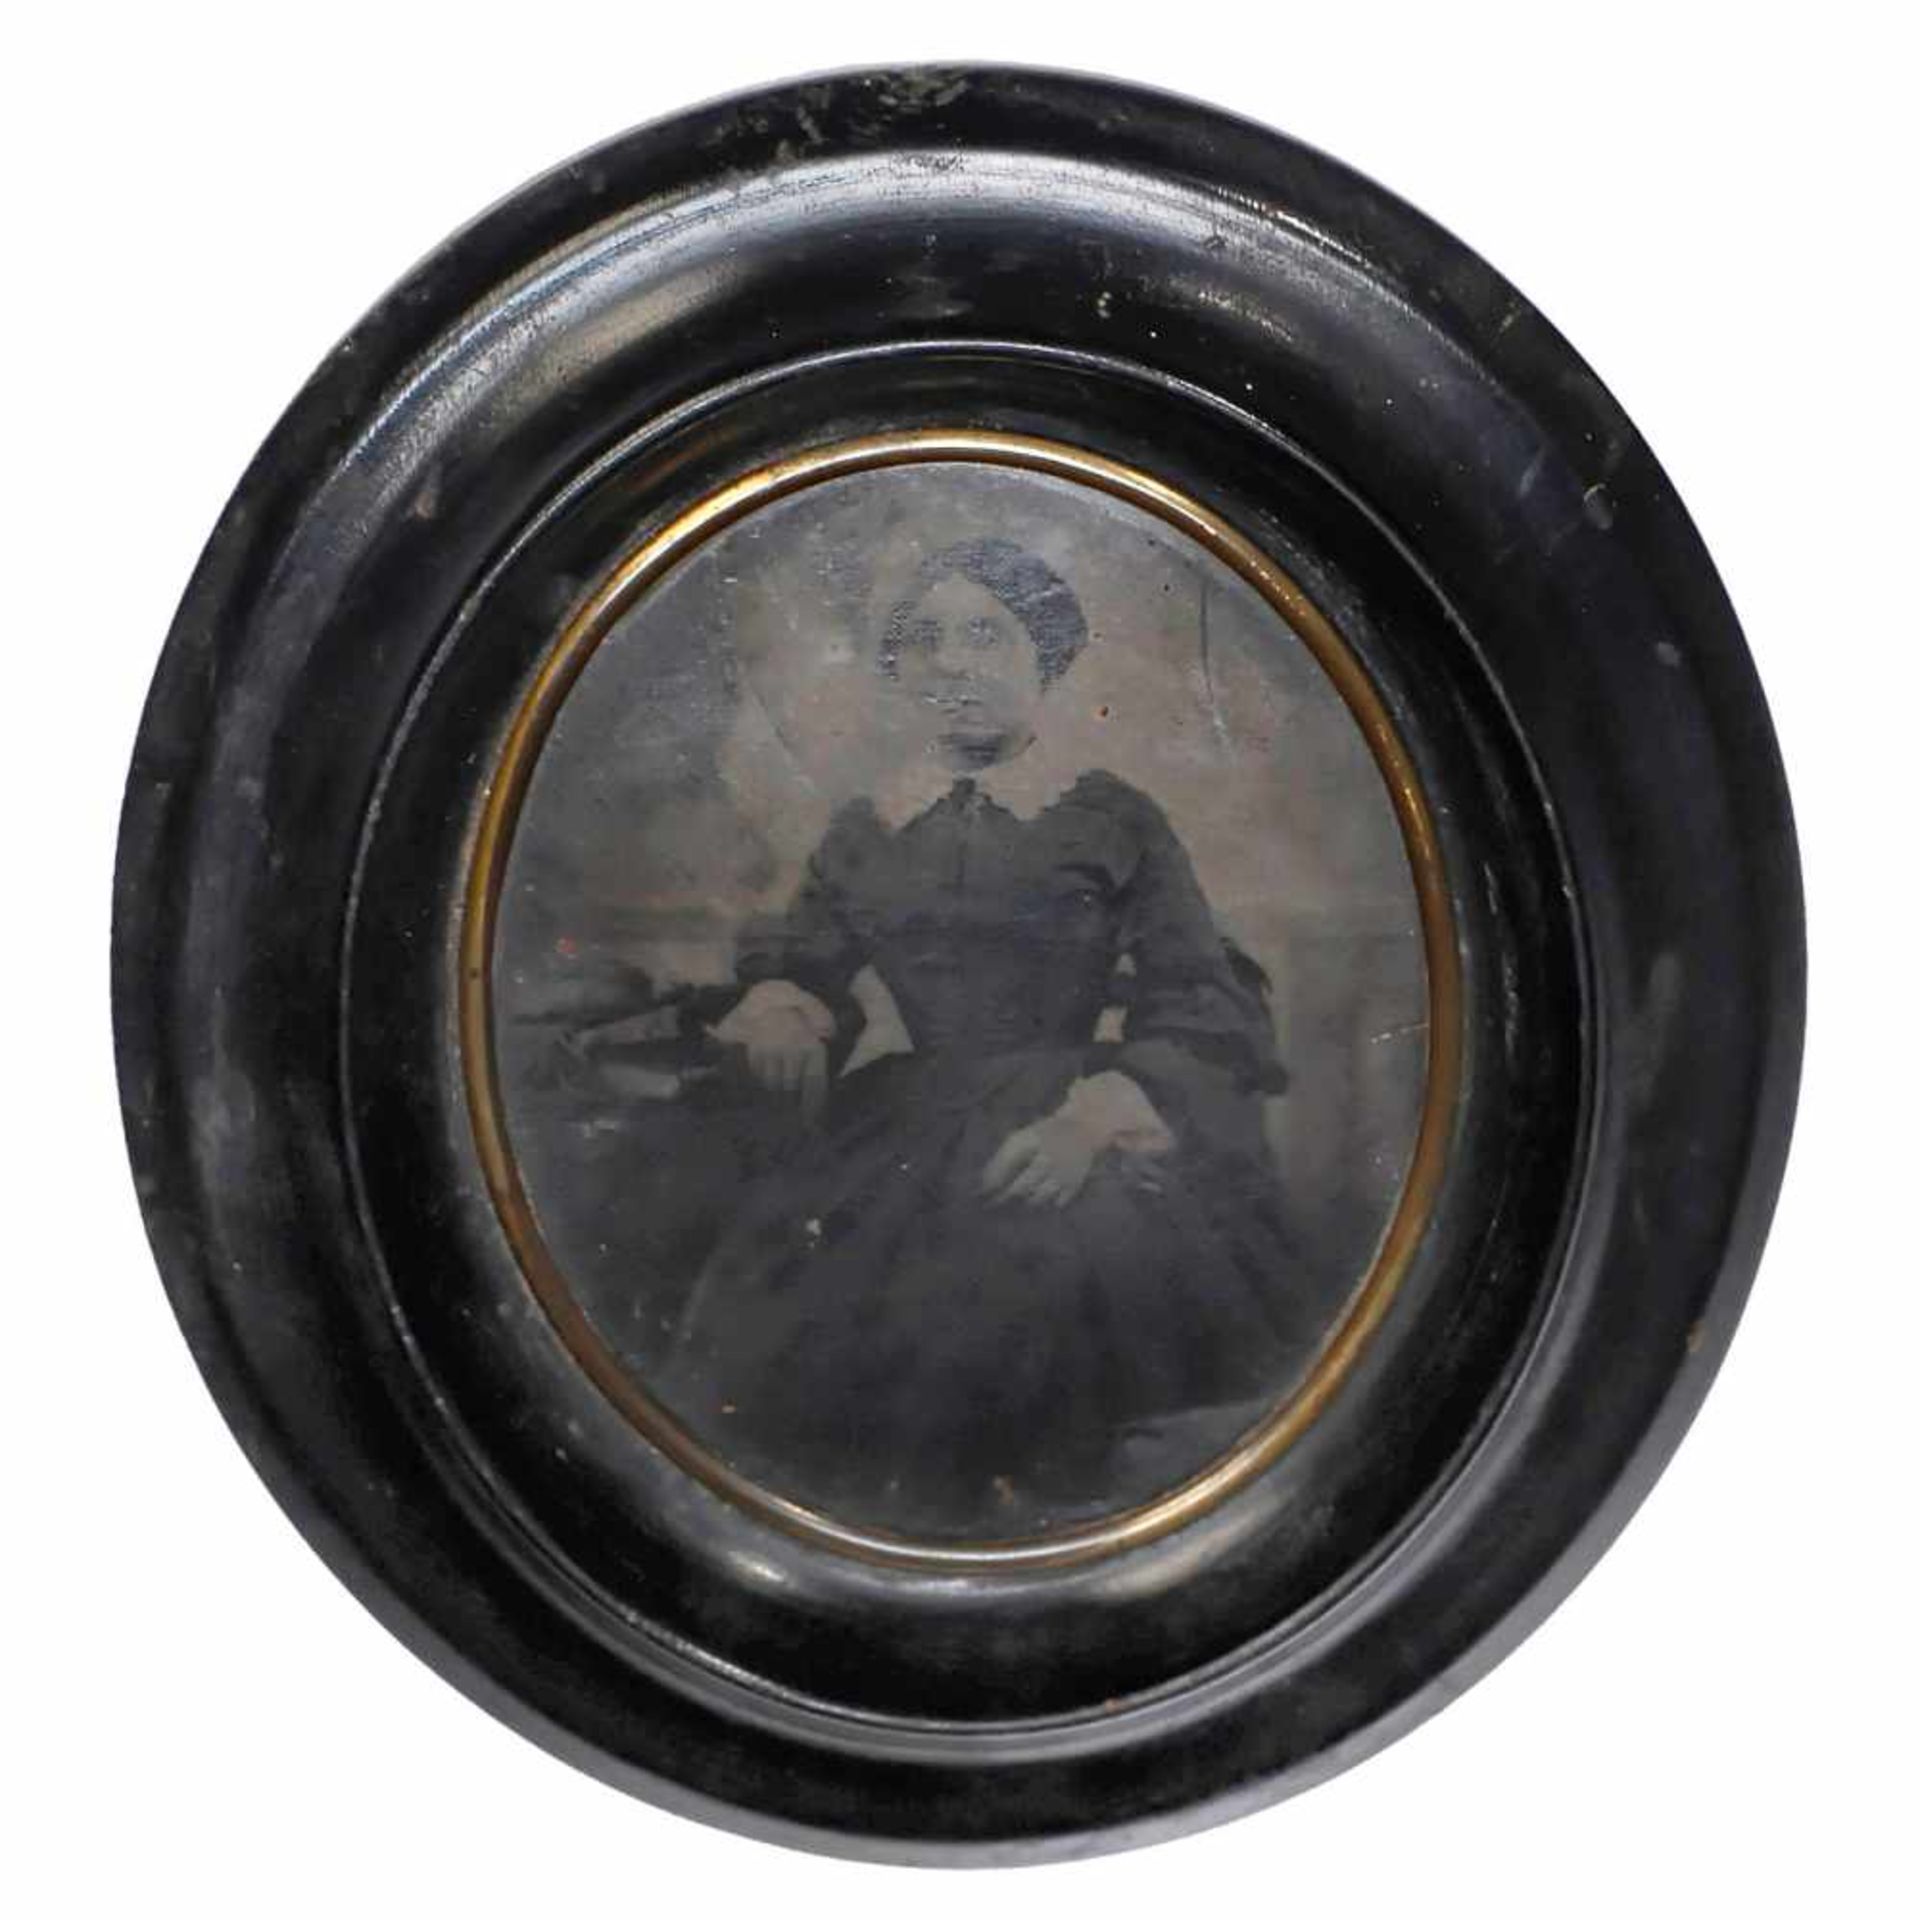 Pannotype, 1853–60Anonymous. Oval image section 9 x 7 cm, on oilcloth substrate. Very rare